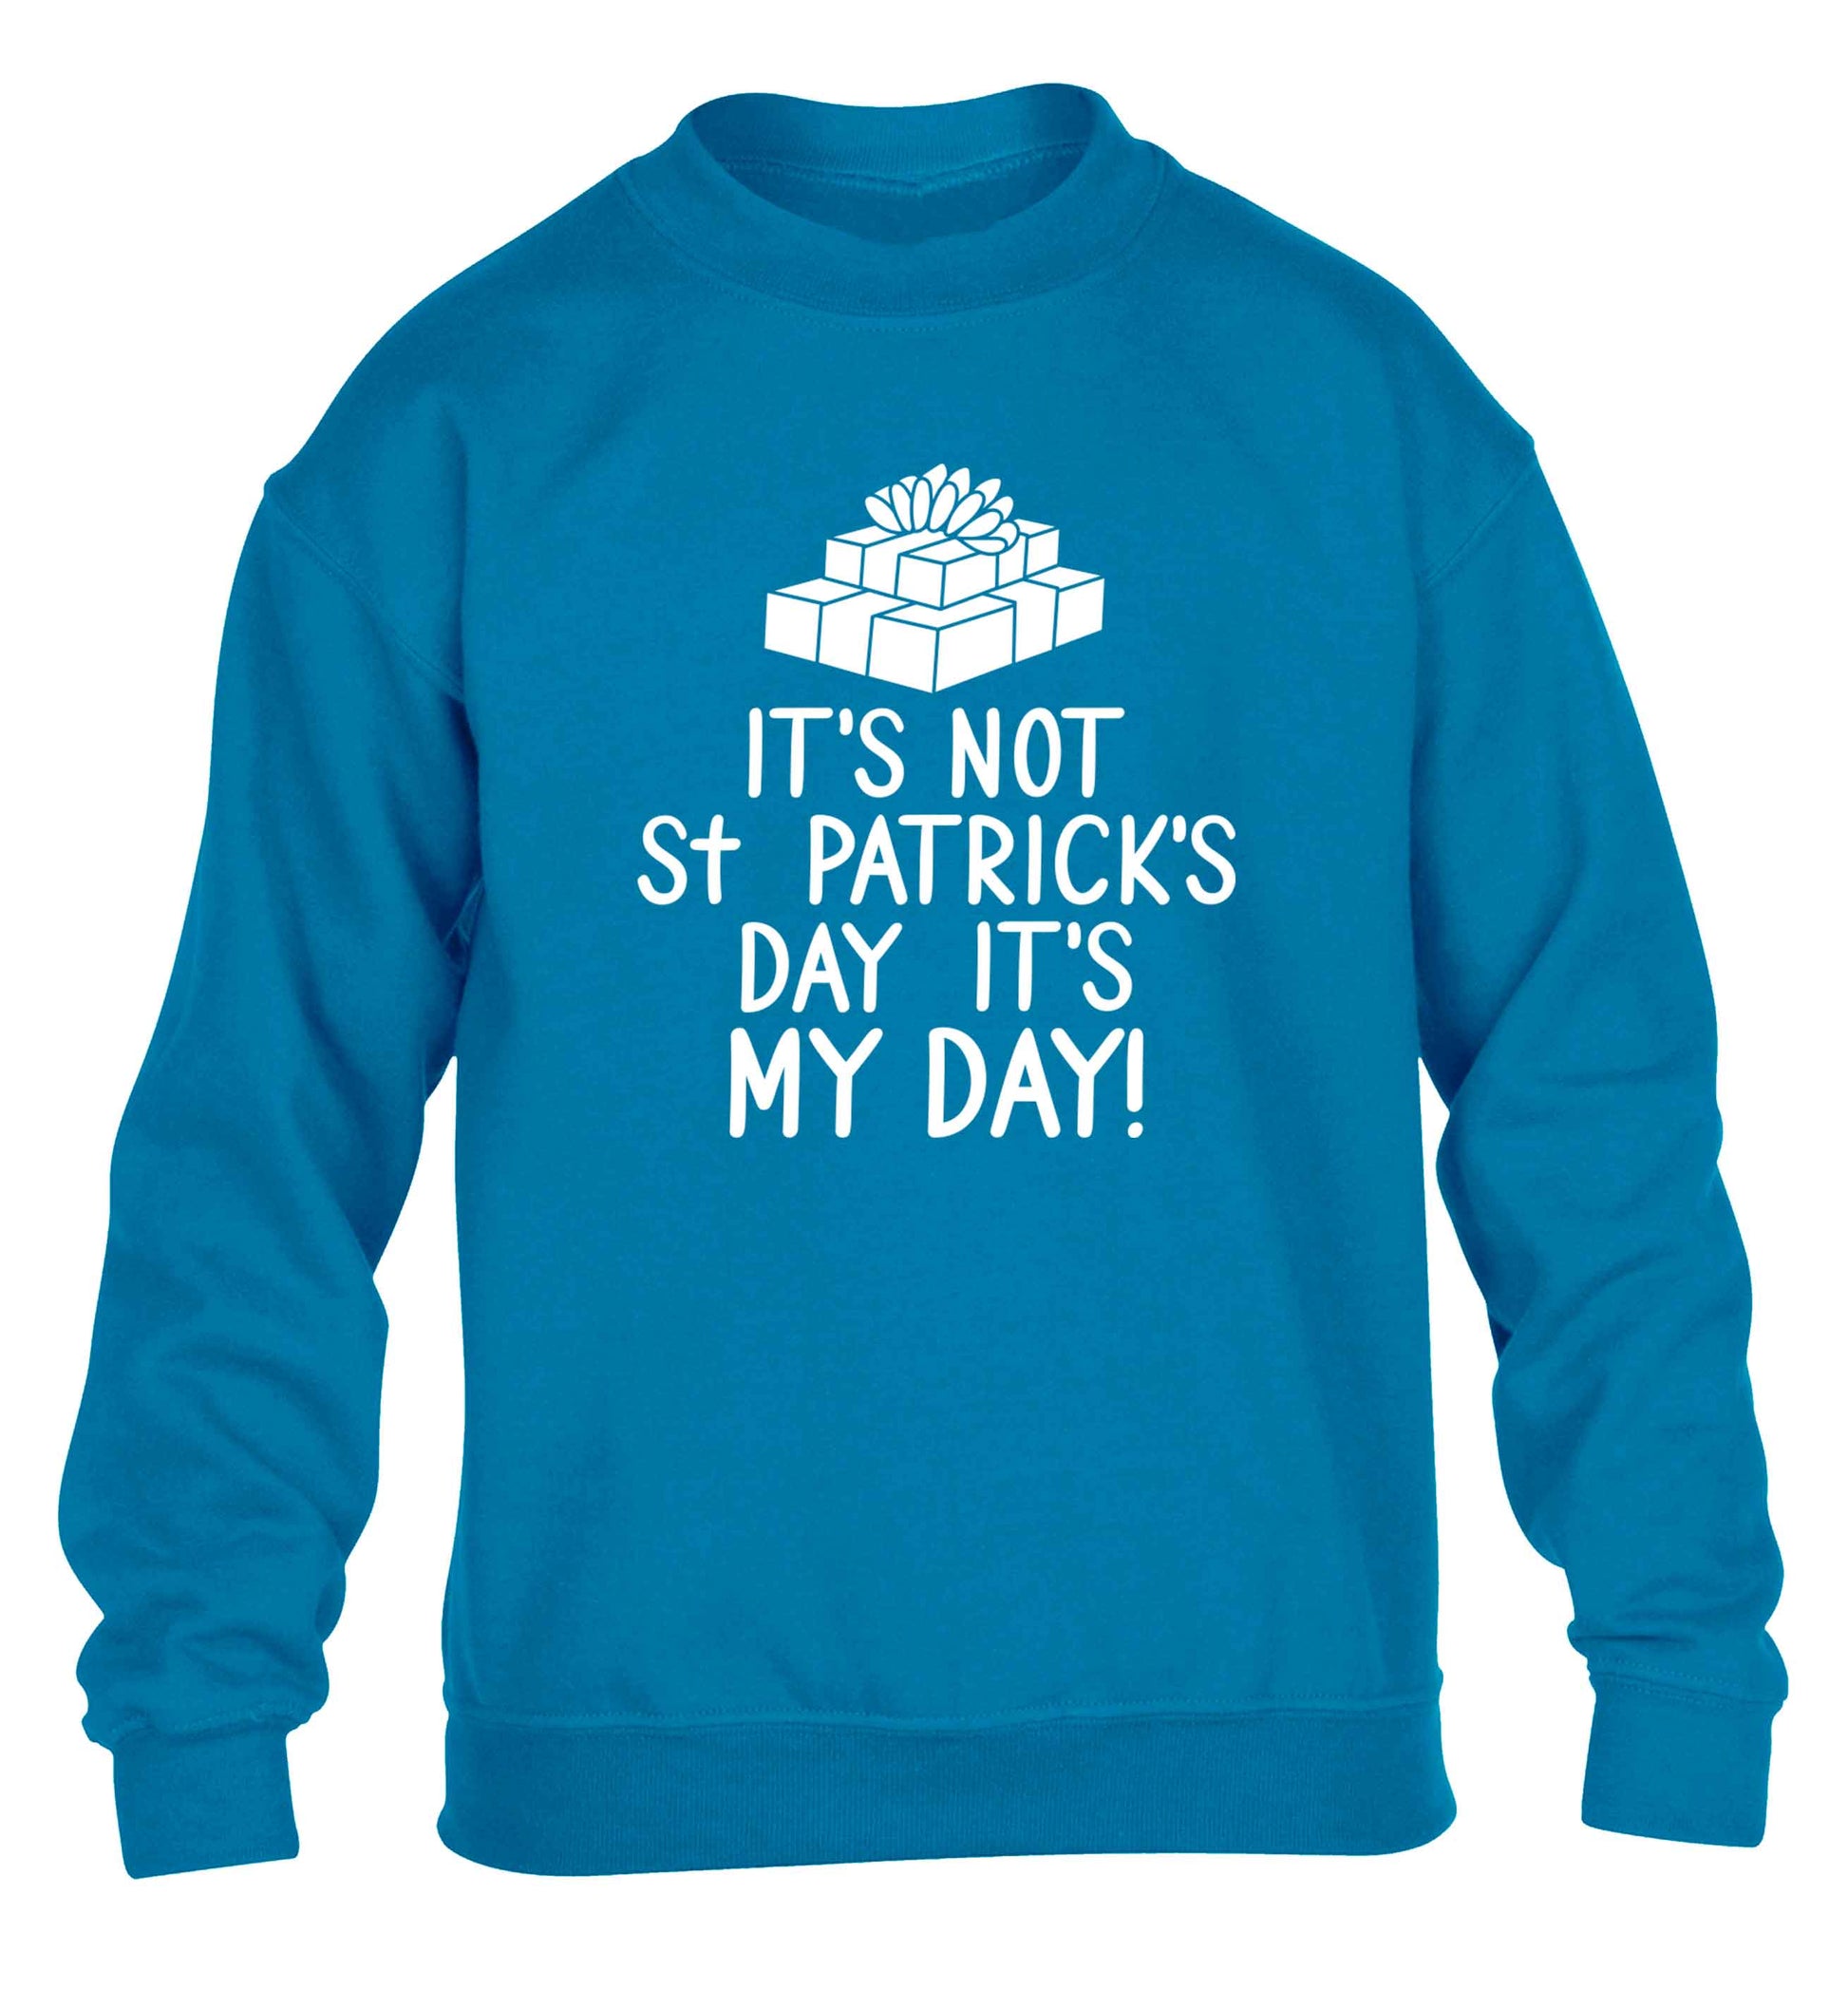 Funny gifts for your mum on mother's dayor her birthday! It's not St Patricks day it's my day children's blue sweater 12-13 Years